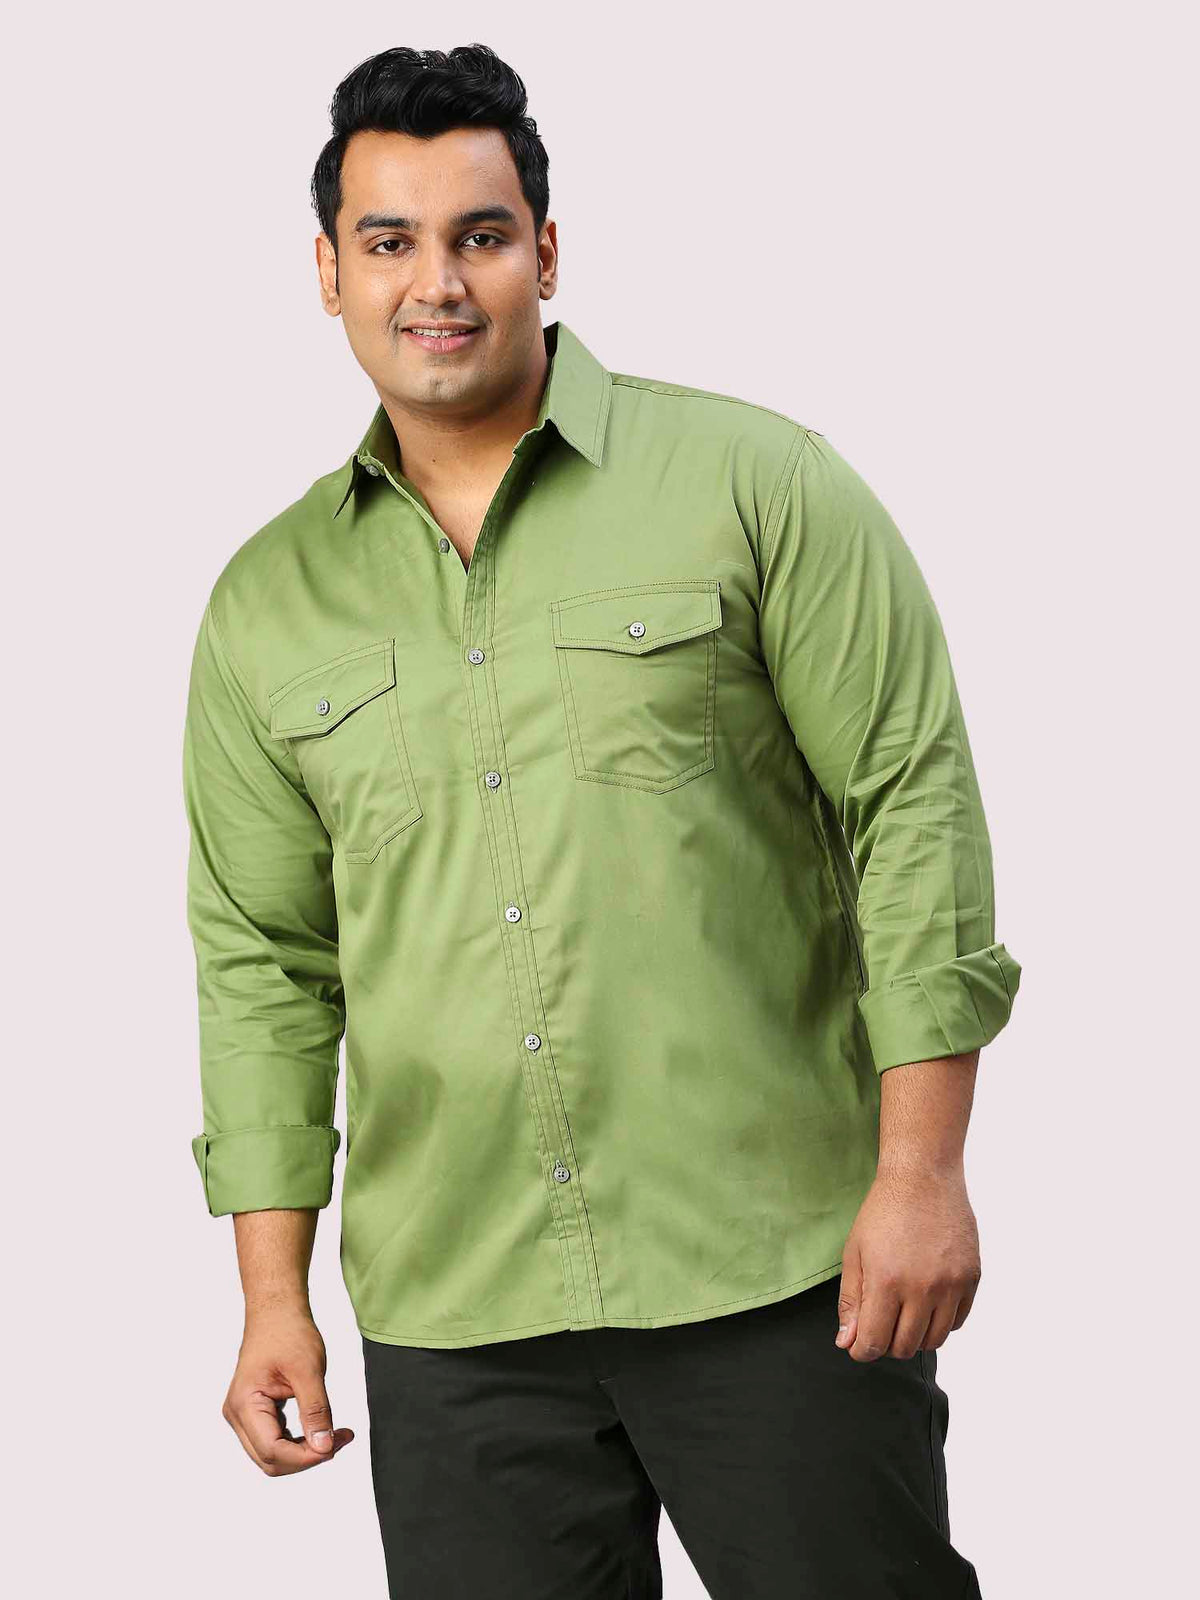 Pista Green Solid Pure Cotton Double Pocket Full Sleeve Shirt Men's Plus Size